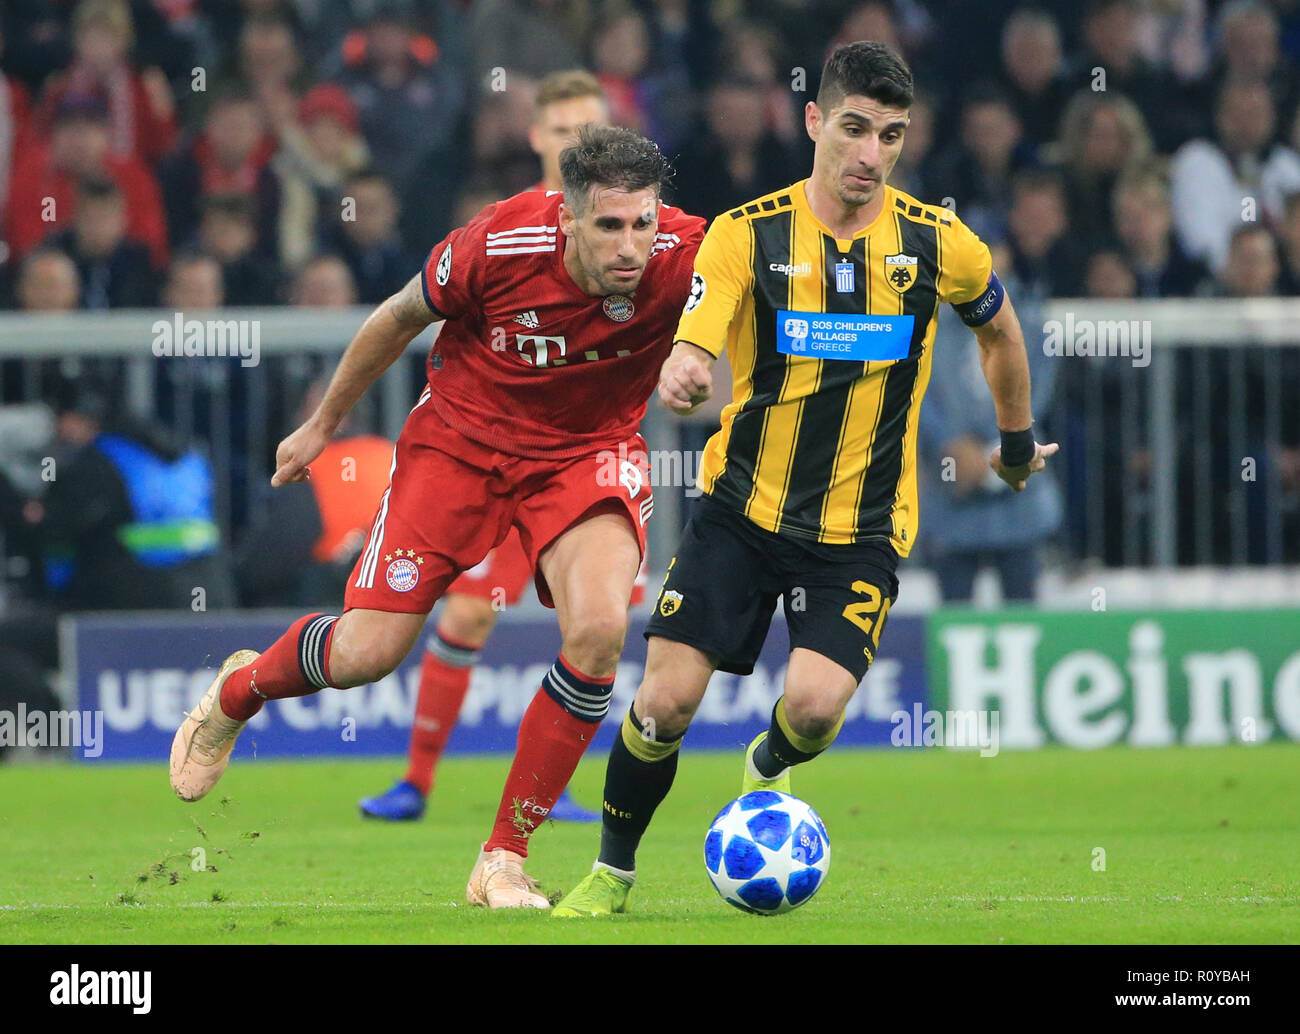 Munich, Germany. 7th Nov, 2018. AEK Athens's Petros Mantalos (R) vies with  Bayern Munich's Javi Martinez during a 4th round match of group E in the  UEFA Champions League between Bayern Munich